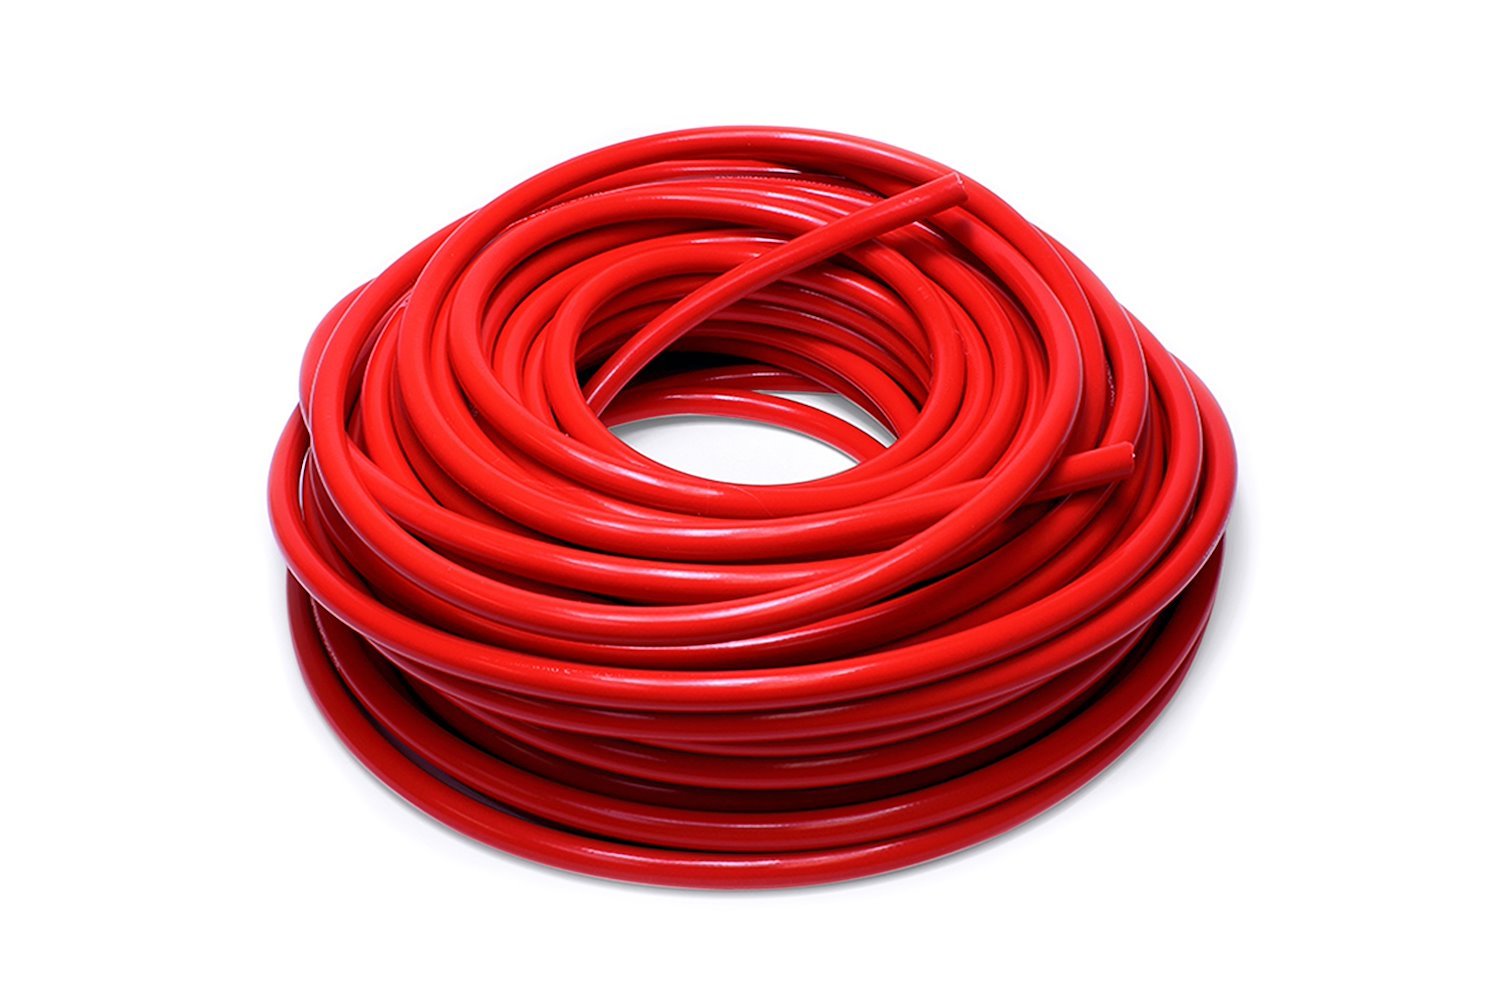 HTHH-032-REDx50 Silicone Heater Hose Tubing, High-Temp 1-Ply Reinforced, 5/16 in. ID, 50 ft. Roll, Red